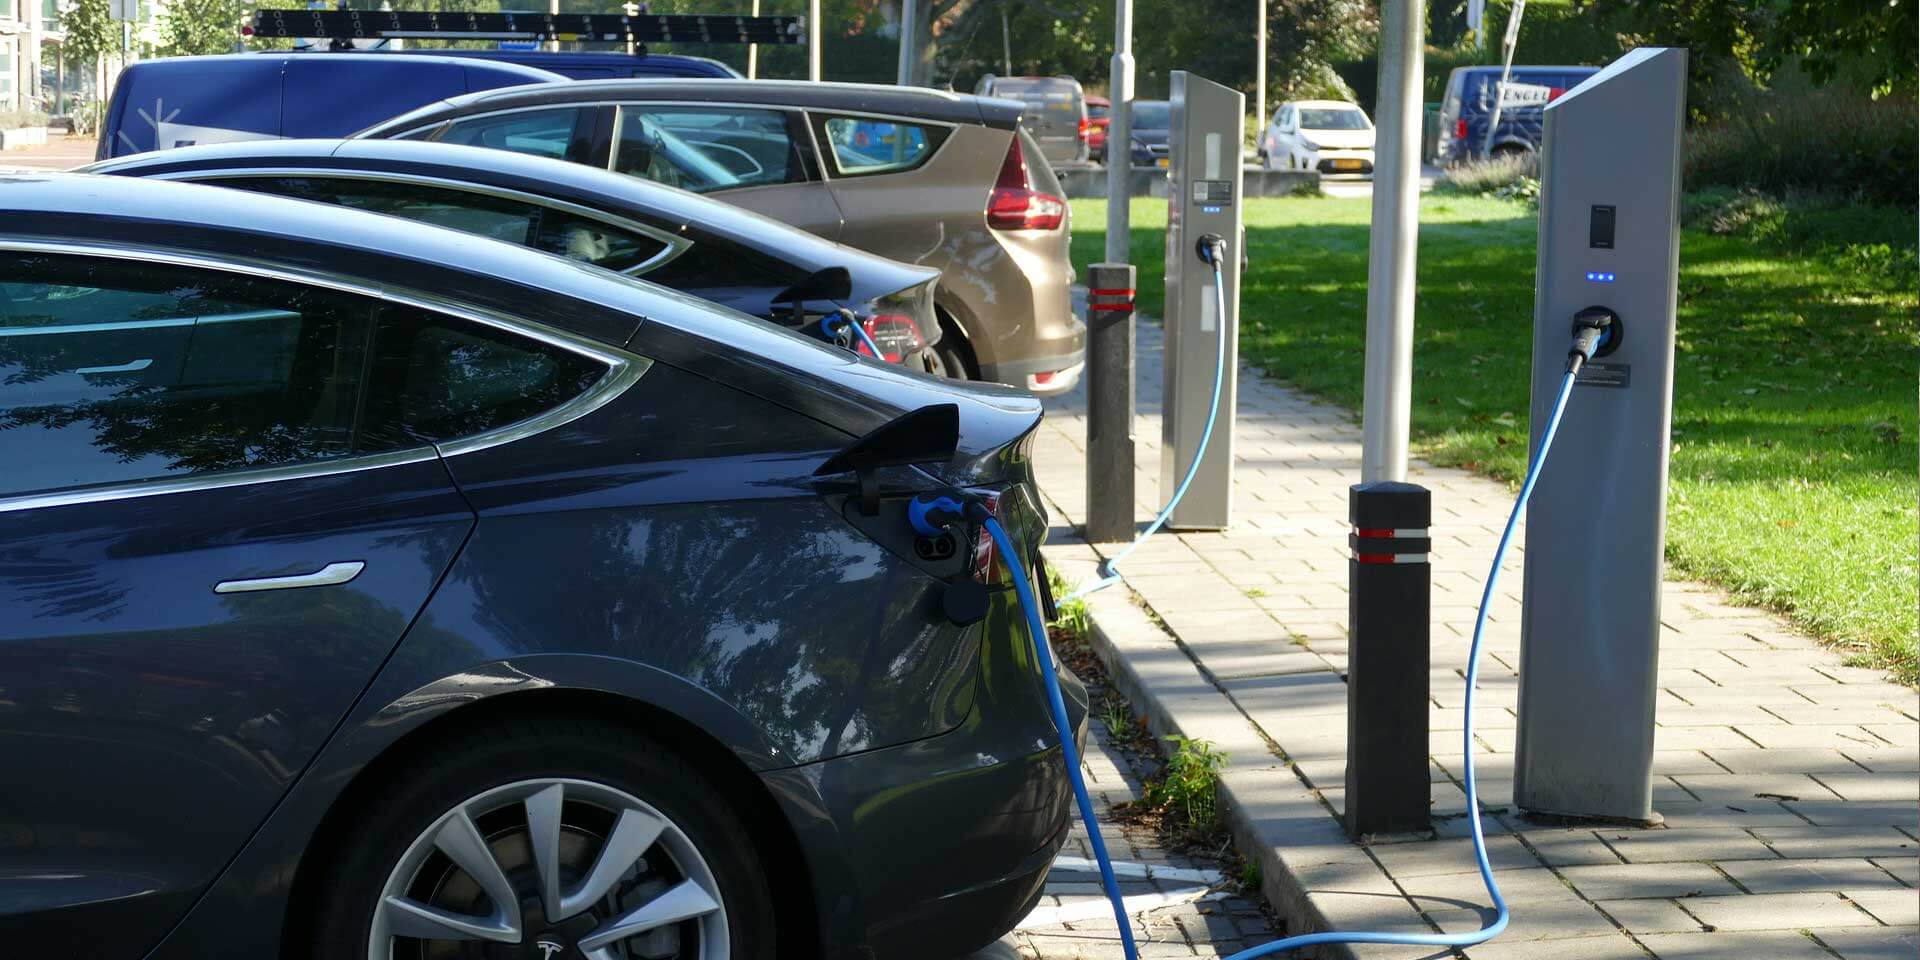 Changes to Building Regulations and EV charging industry coming in June